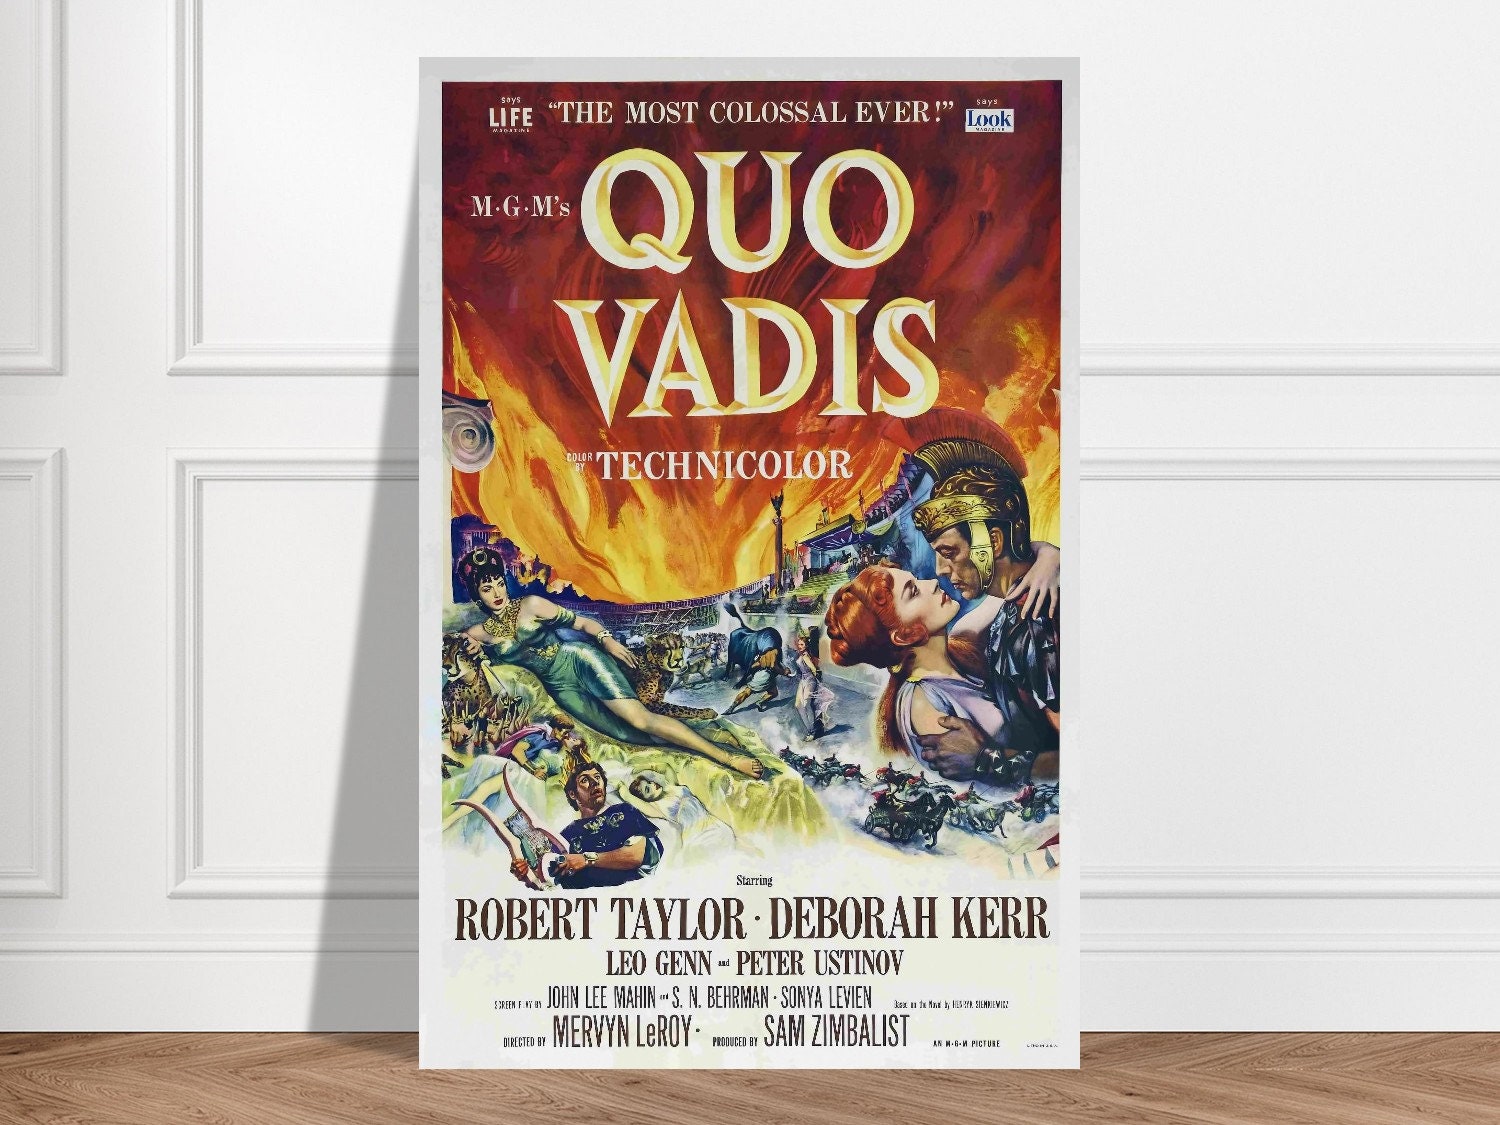 Advertising postcard for the movie “Quo Vadis” (MGM, 1951)…